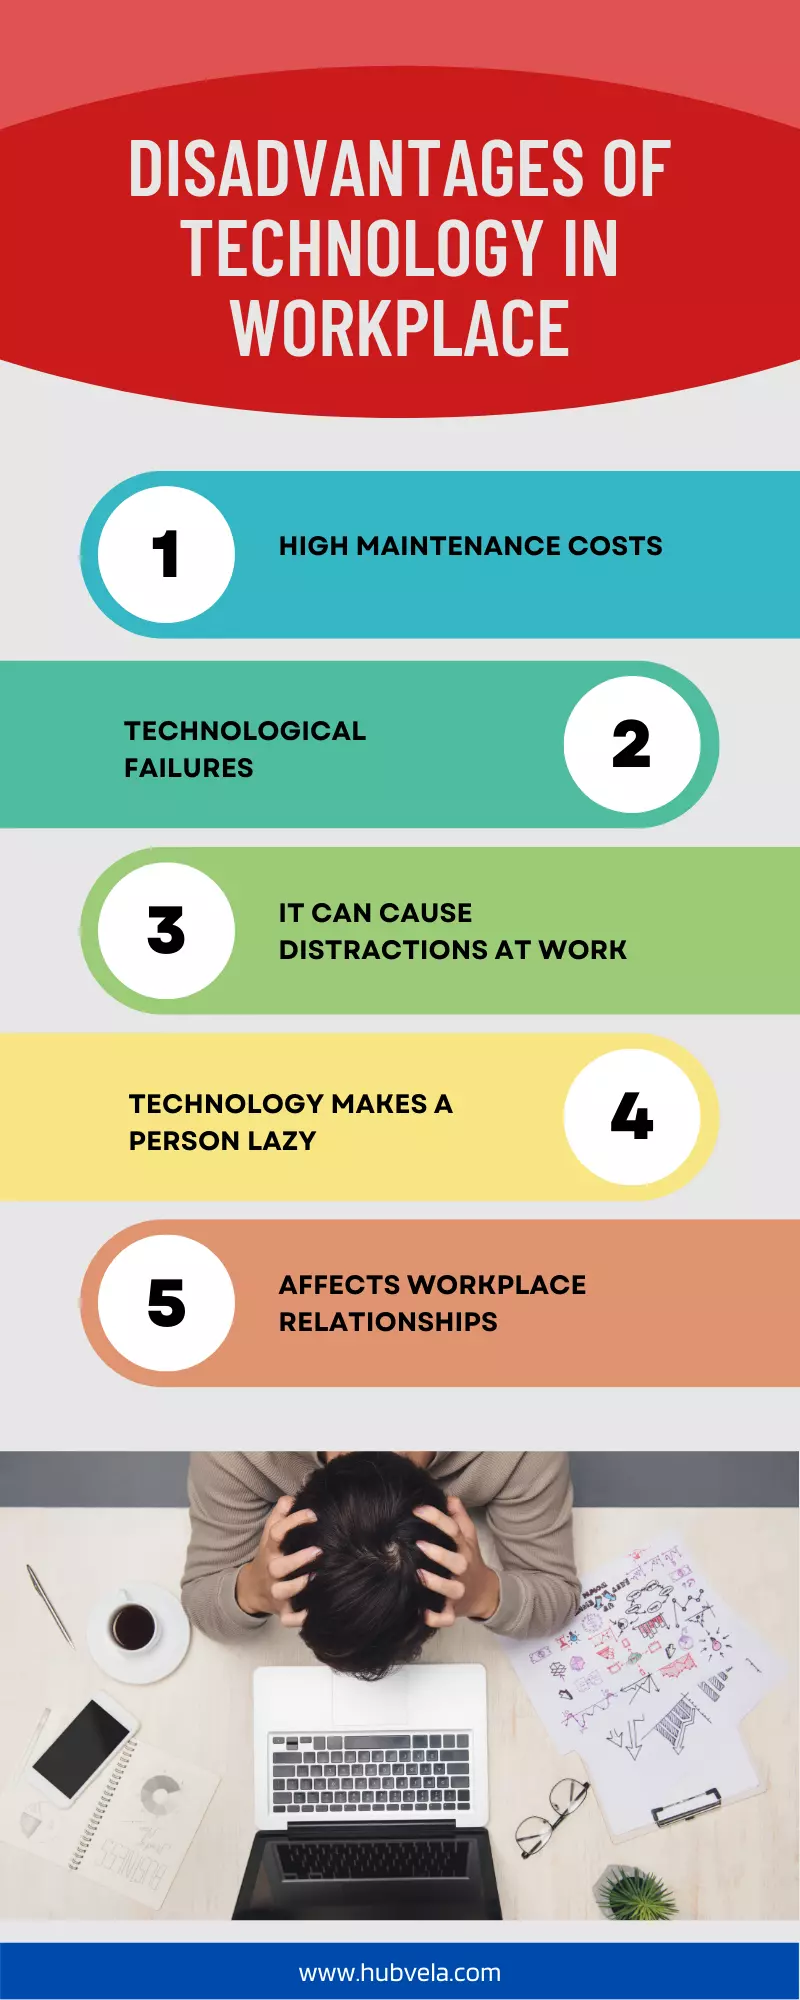 Disadvantages of Technology in Workplace infographic